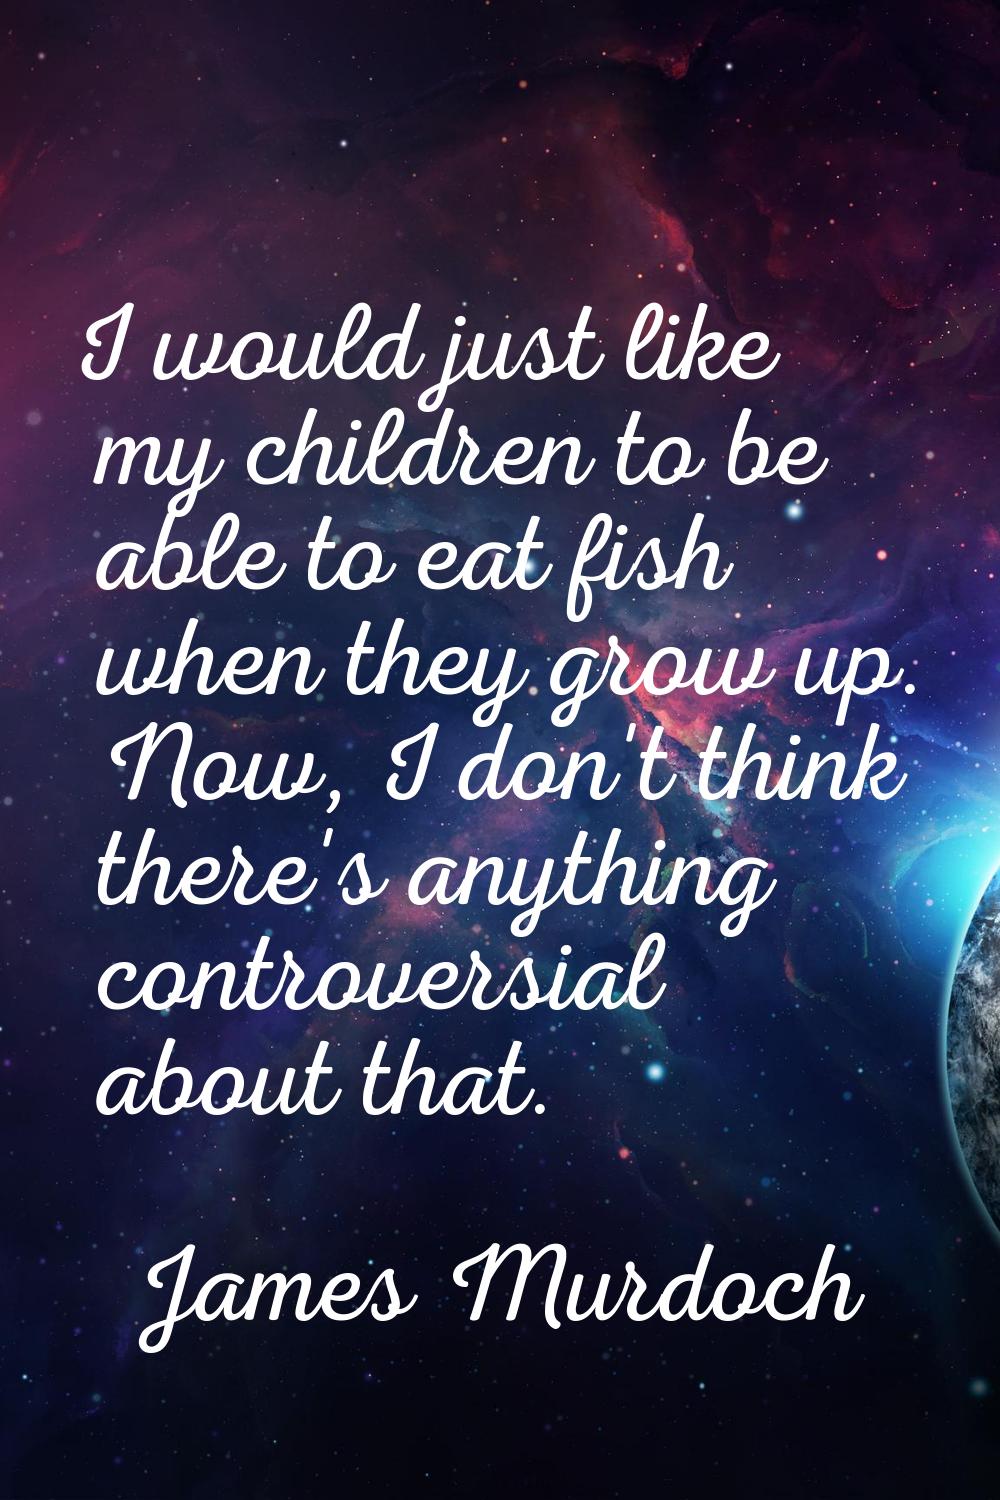 I would just like my children to be able to eat fish when they grow up. Now, I don't think there's 